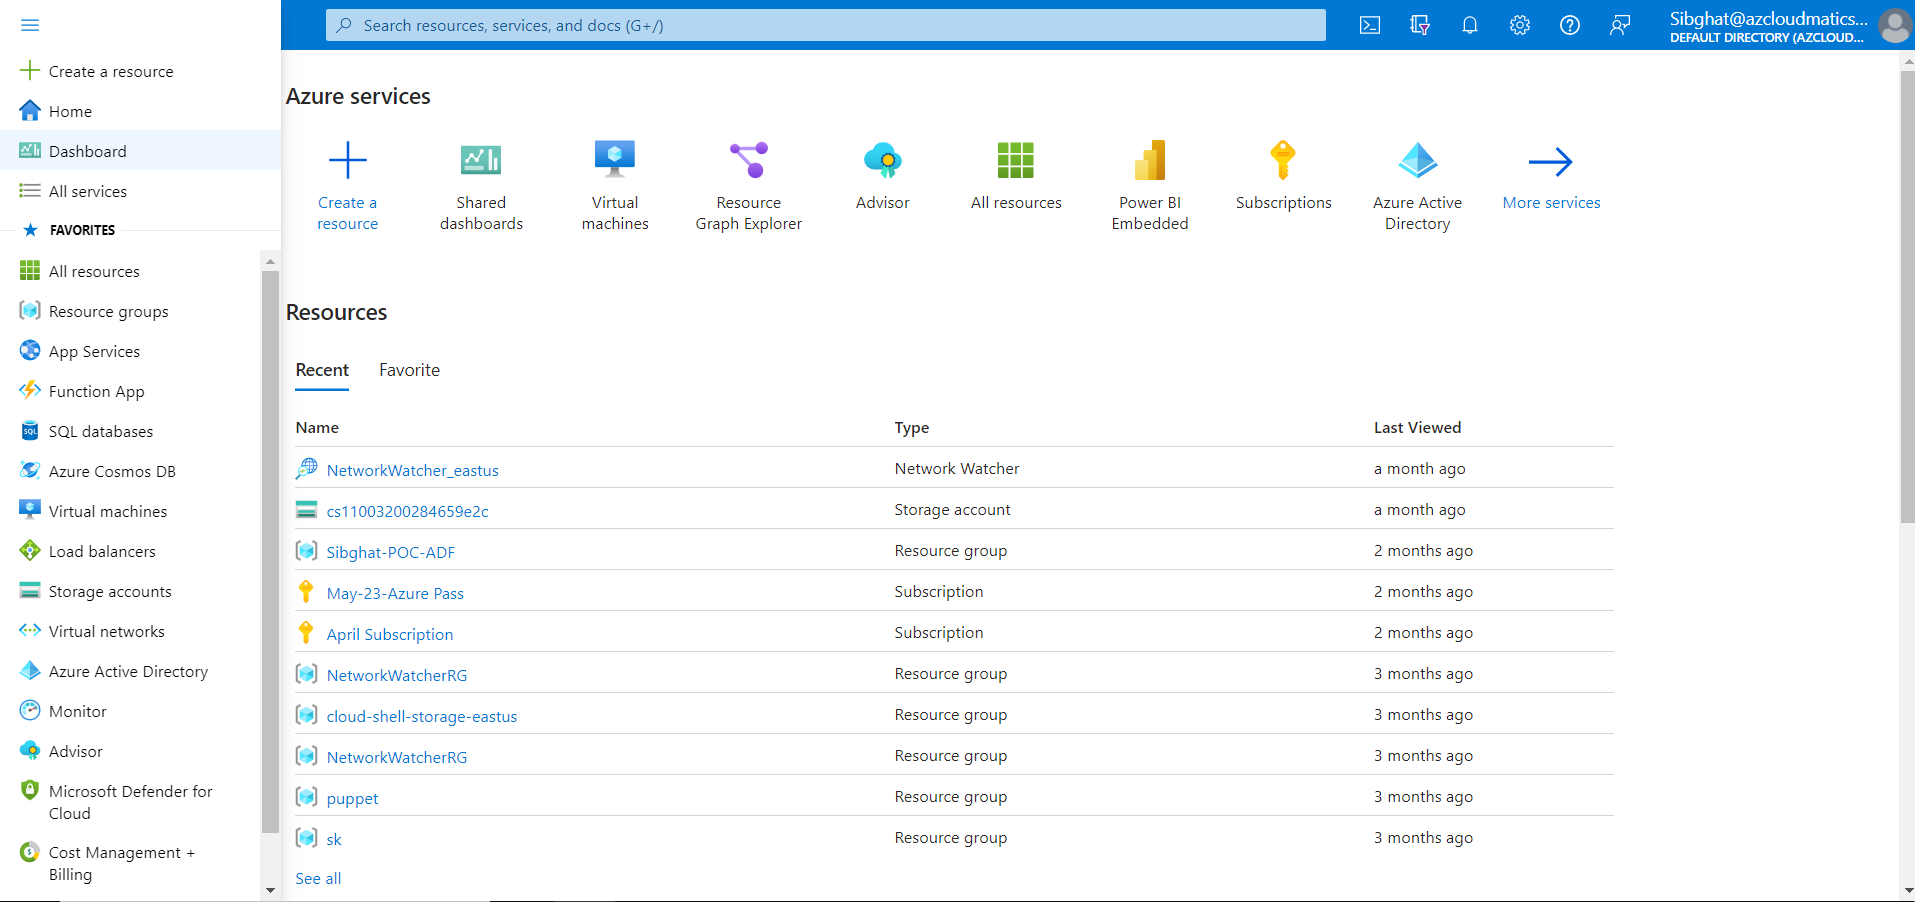 What are the benefits of using Virtual Machines in Azure?